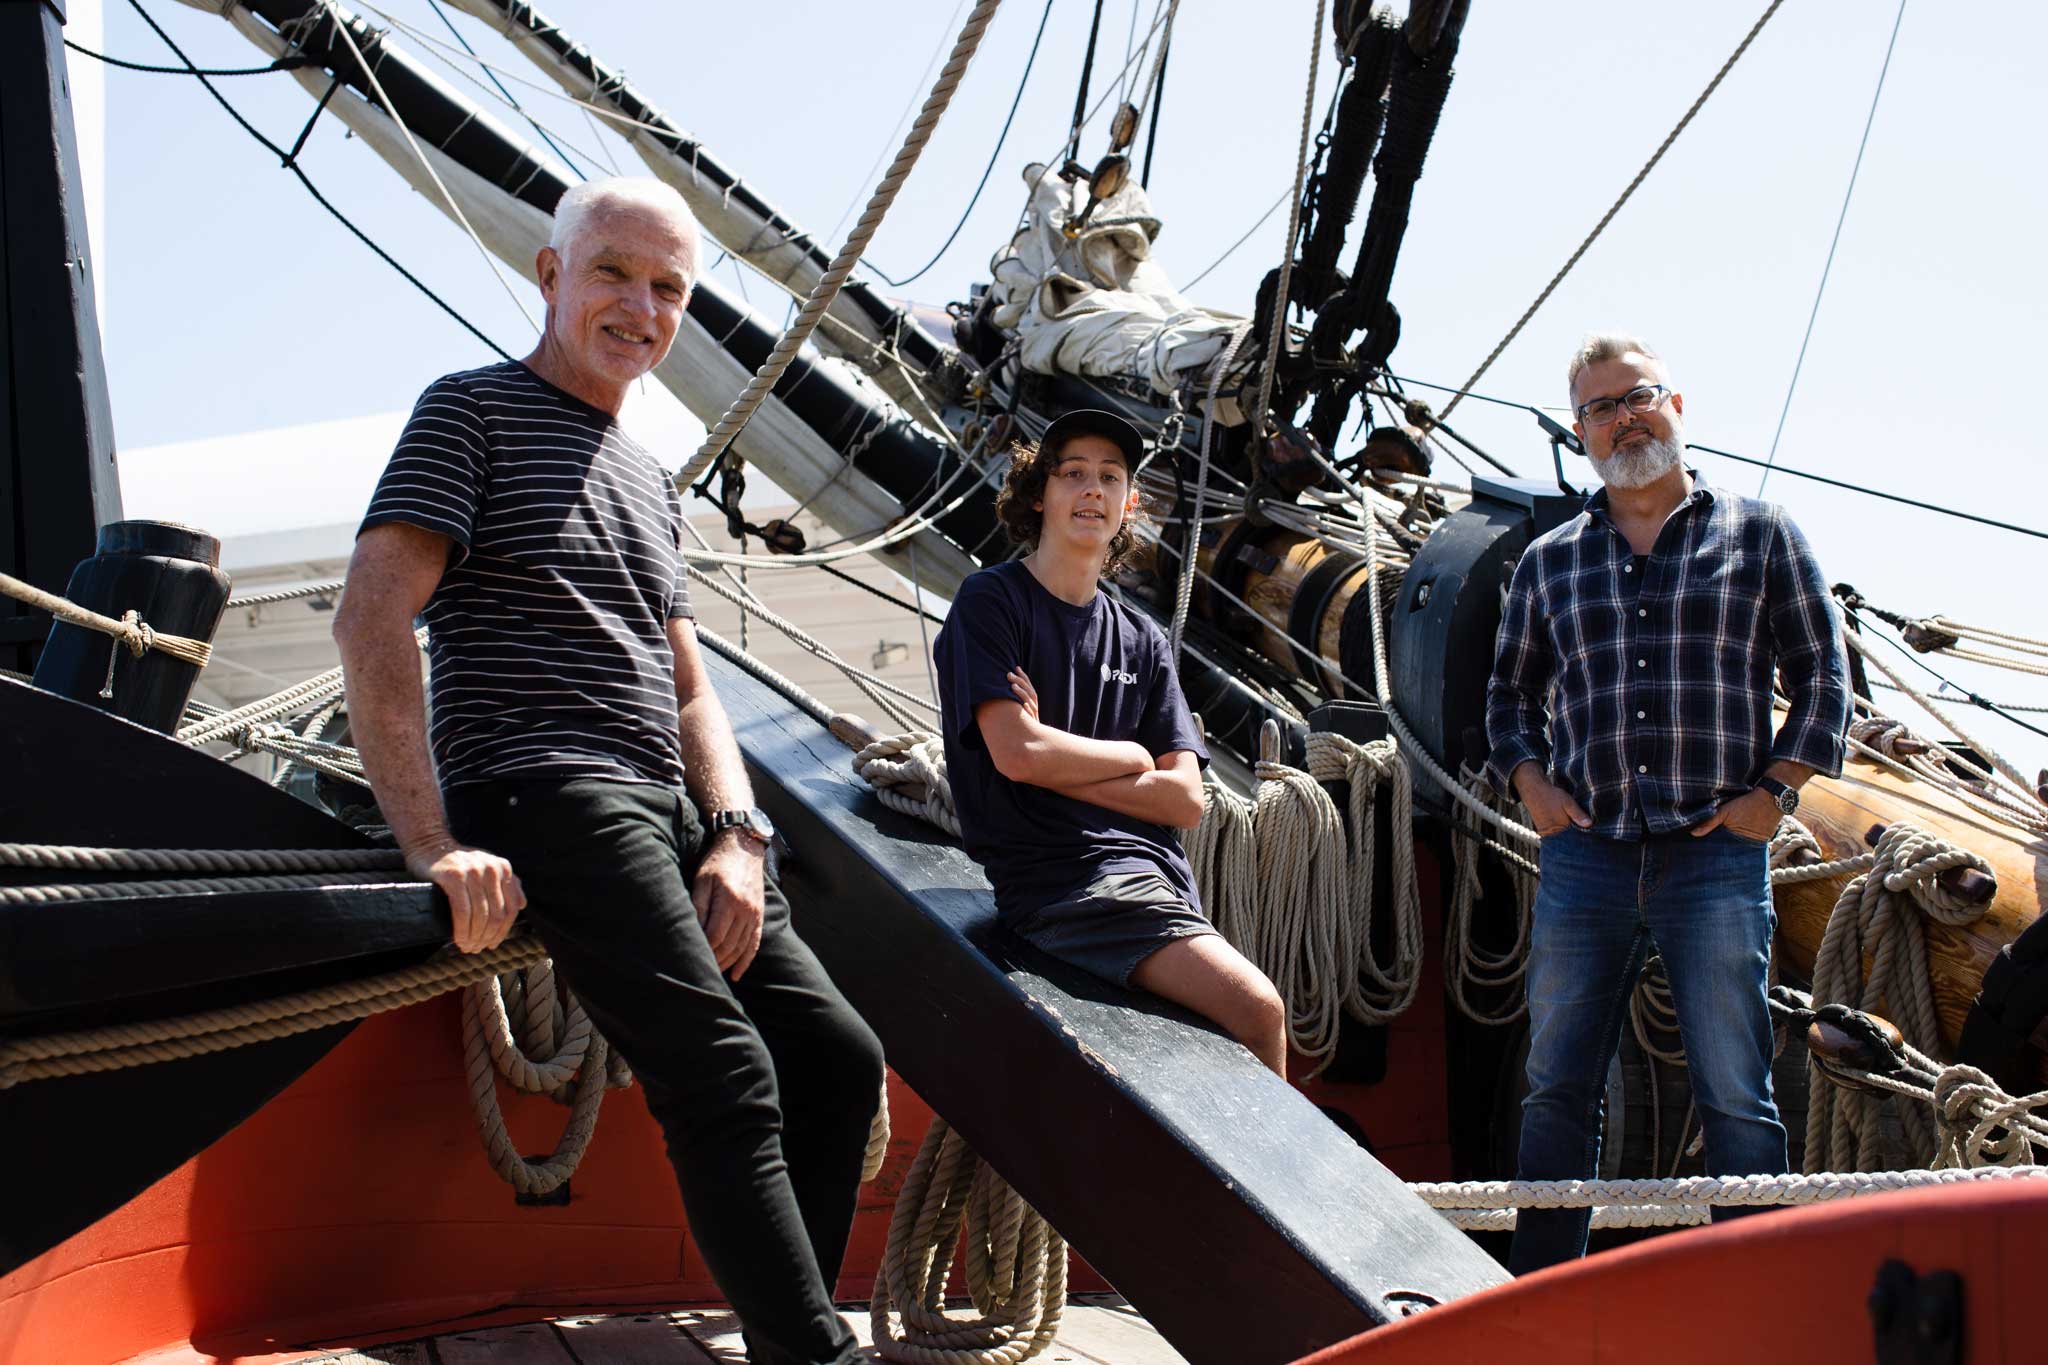 Leo Oliver with Maritime Archaeologists James and Kieran